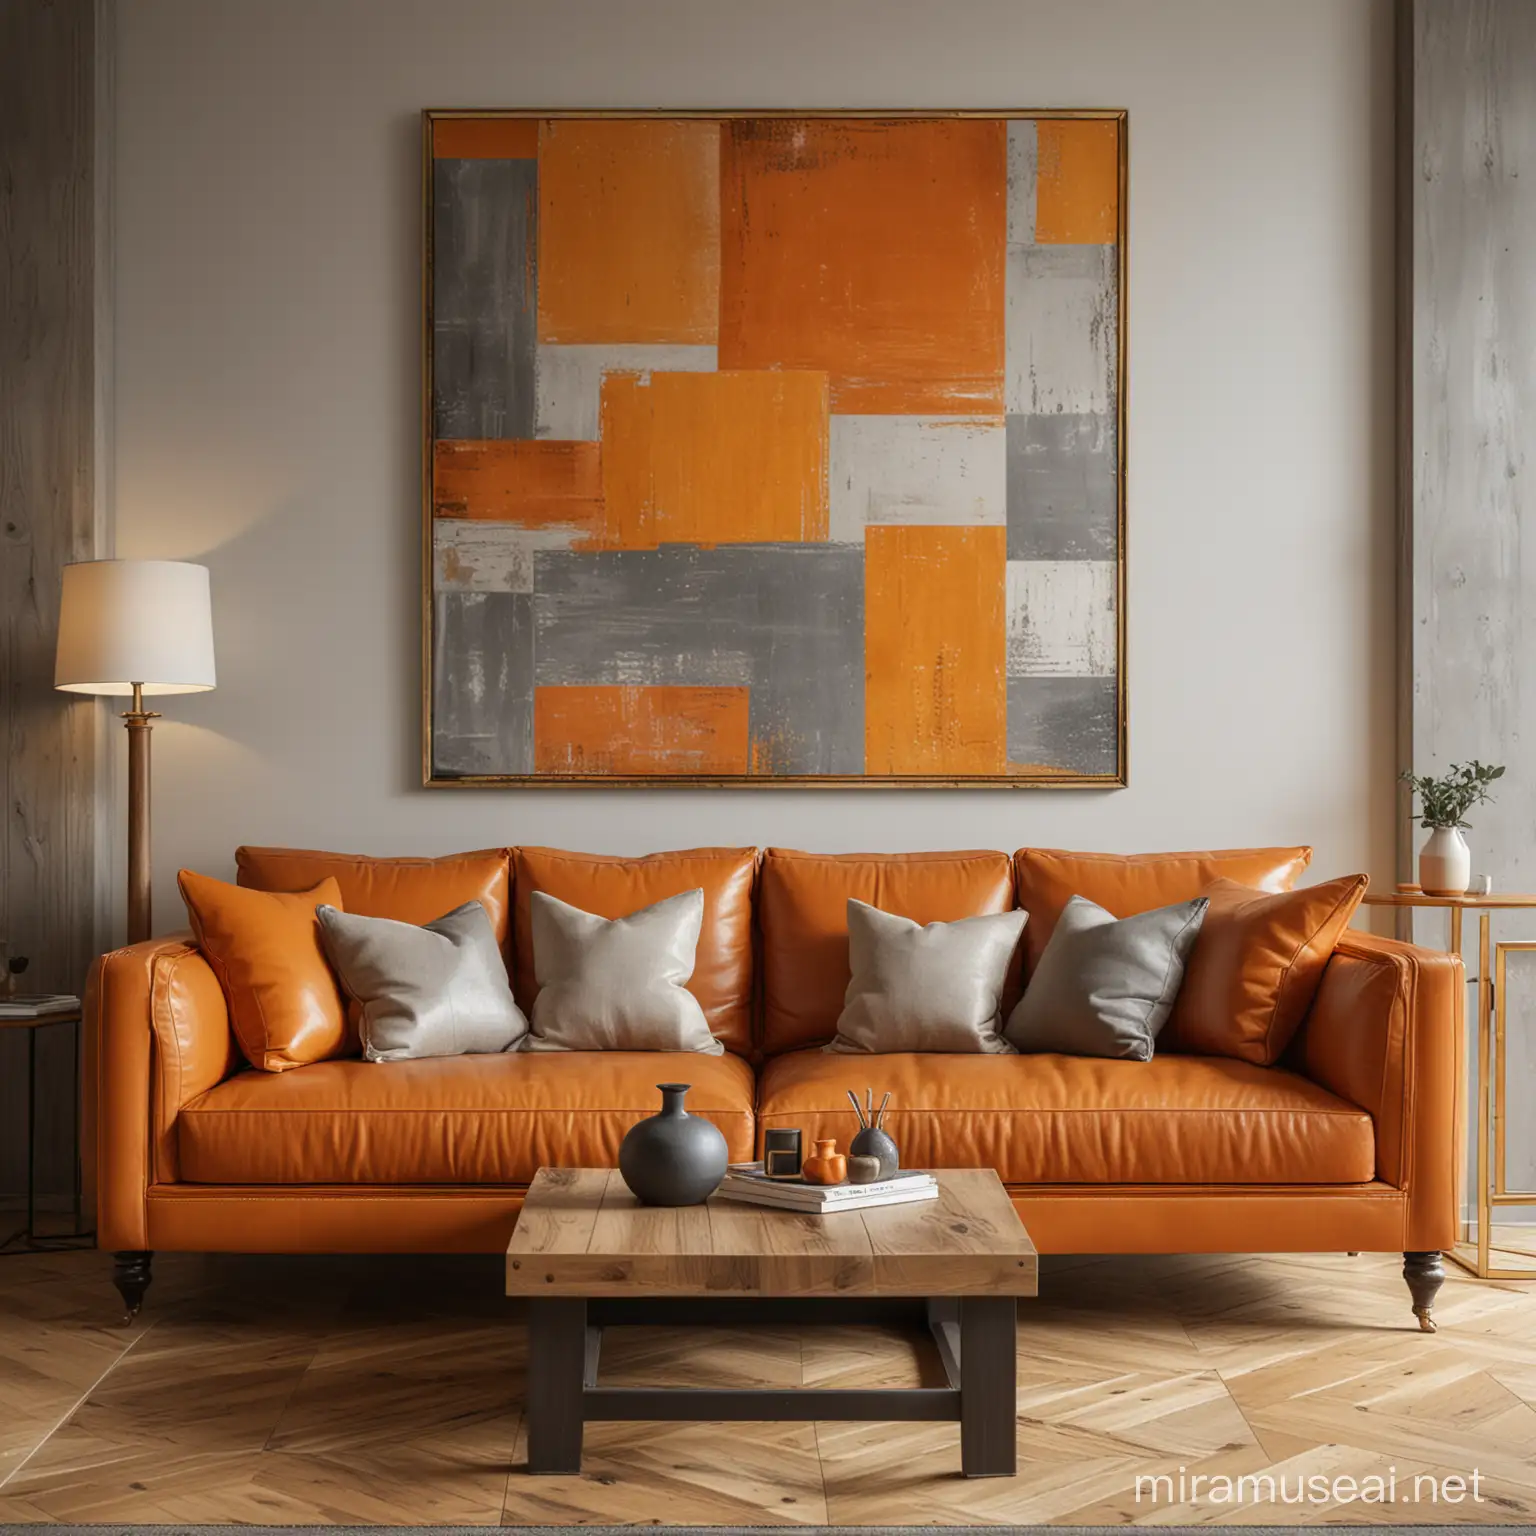 Cozy Living Room Interior with Golden Leather Sofa and Square Artwork